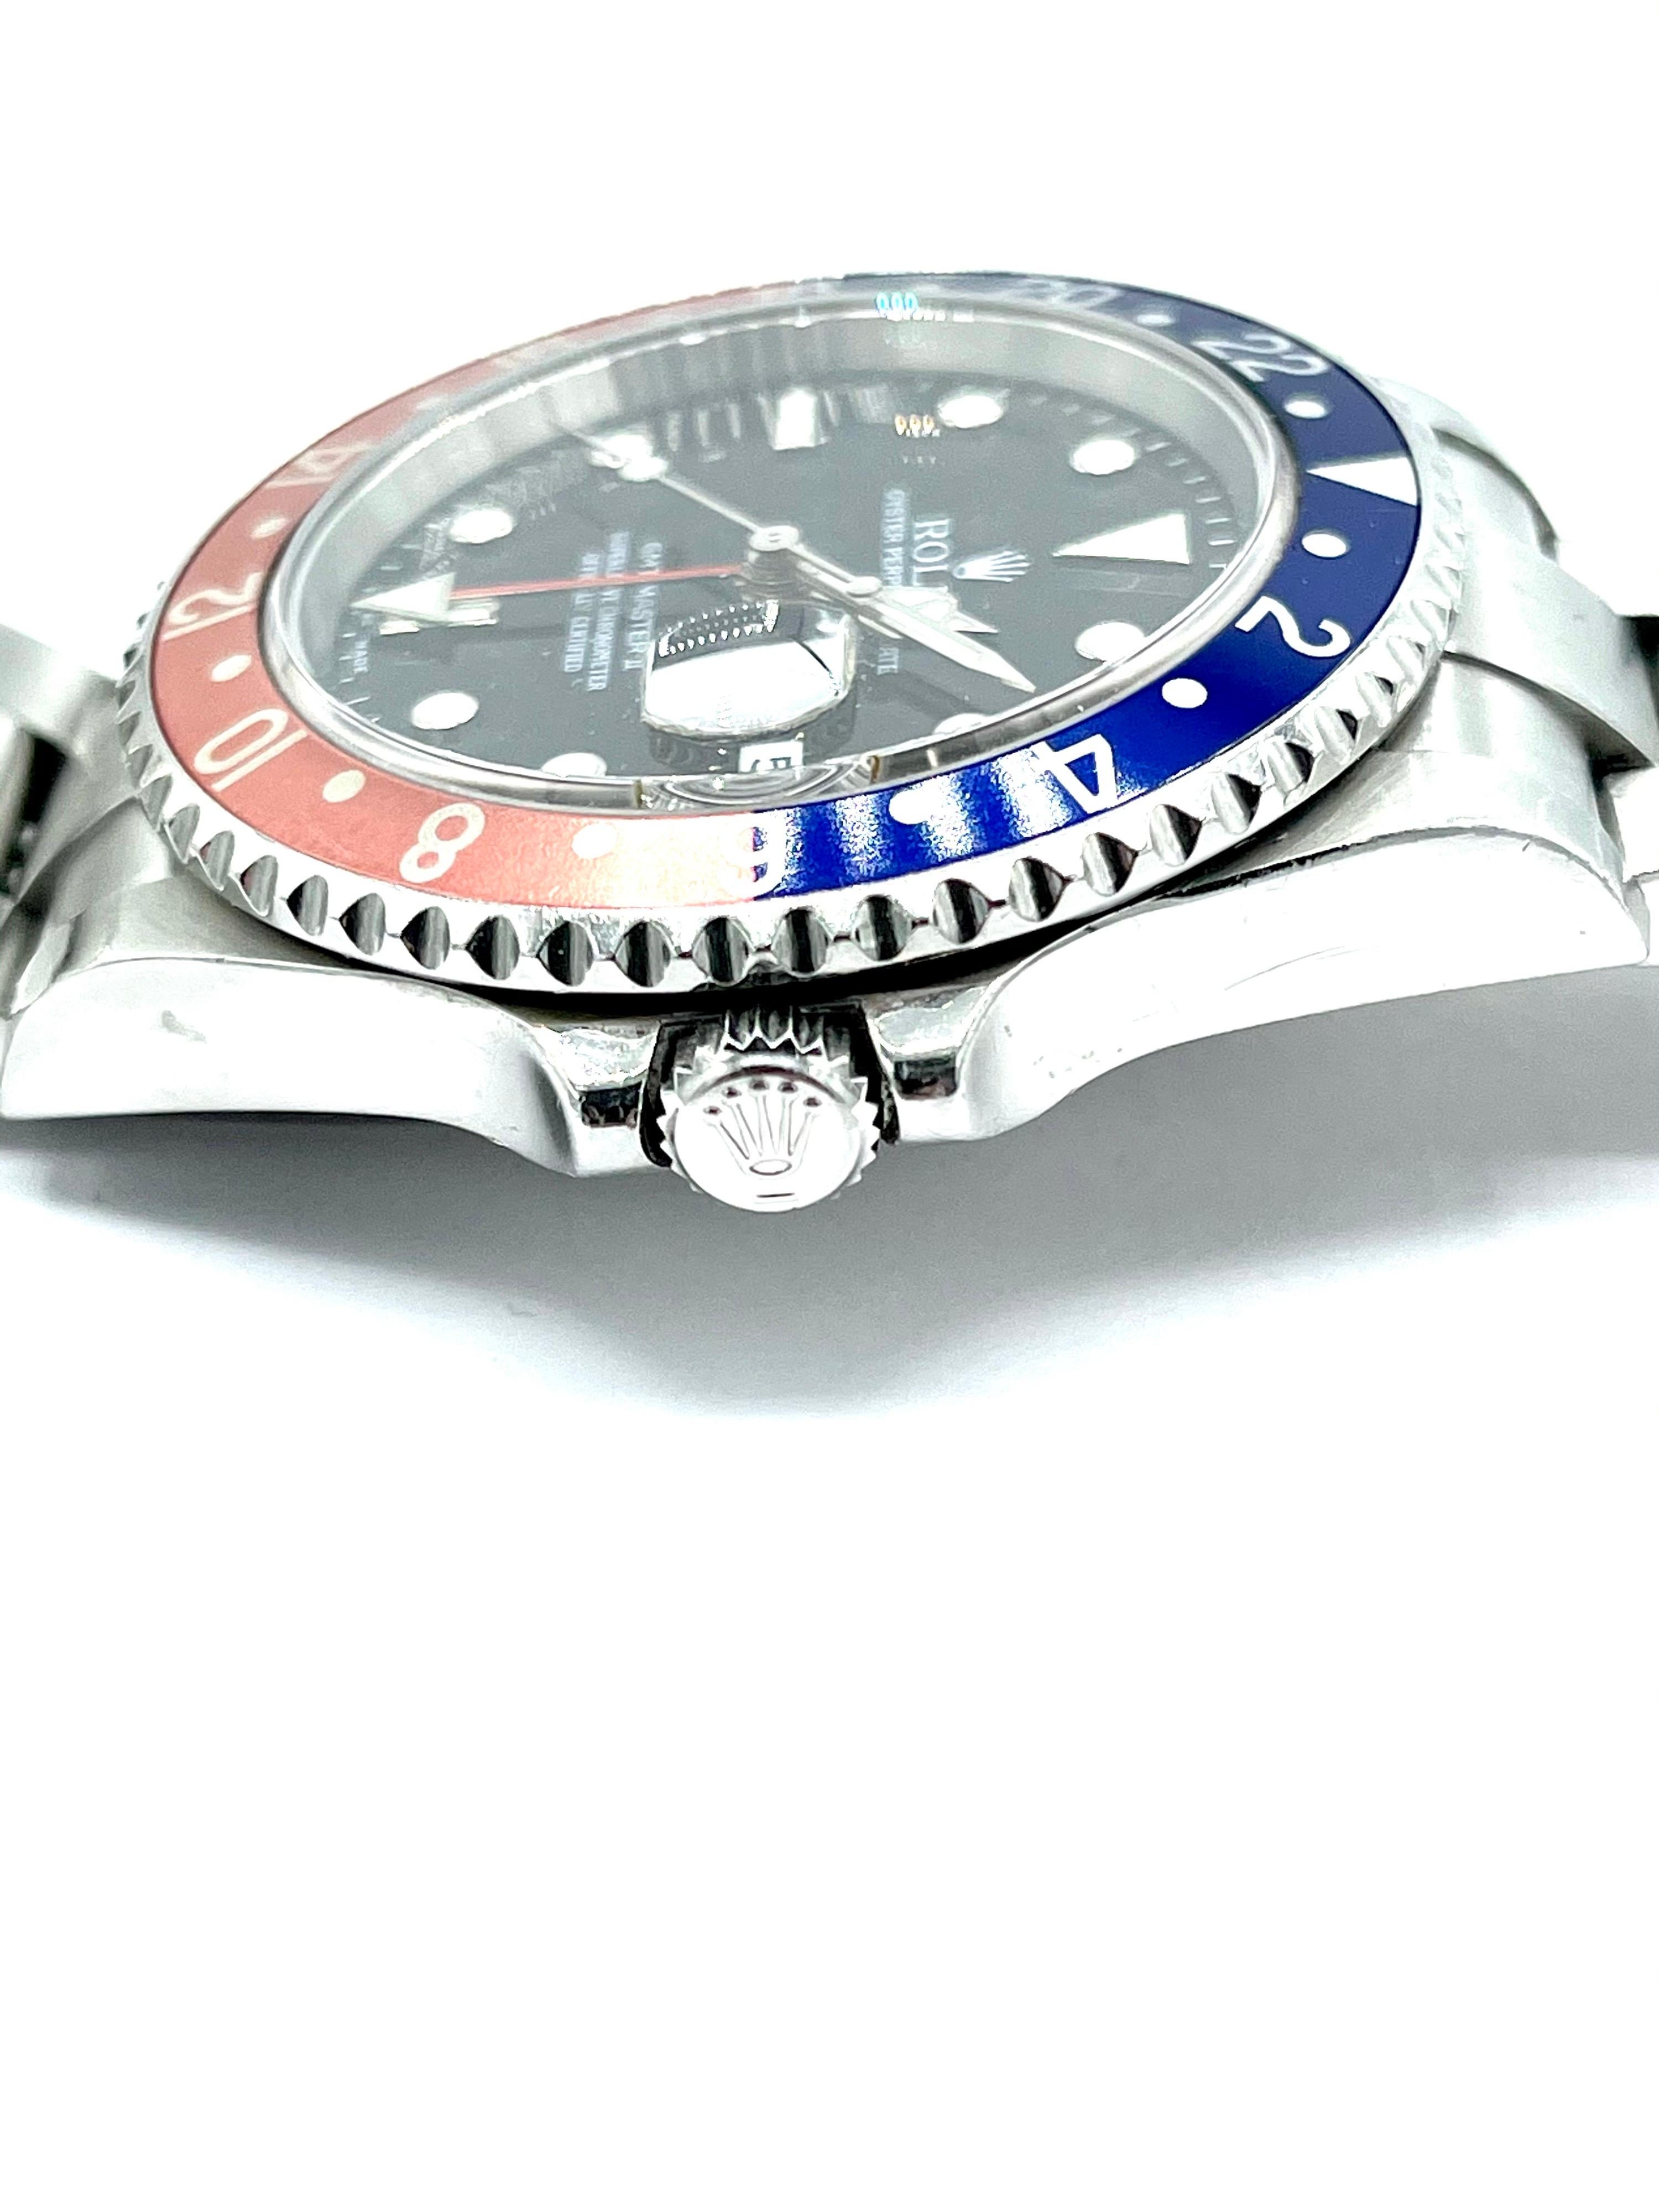 A rare find!  2004 Rolex GMT Master II Pepsi edition stainless steel watch.  The watch is a 40mm case with a black dial and sapphire crystal, and the Rolex signature magnification over the date.  Style number 16710T, serial number F679398.  The